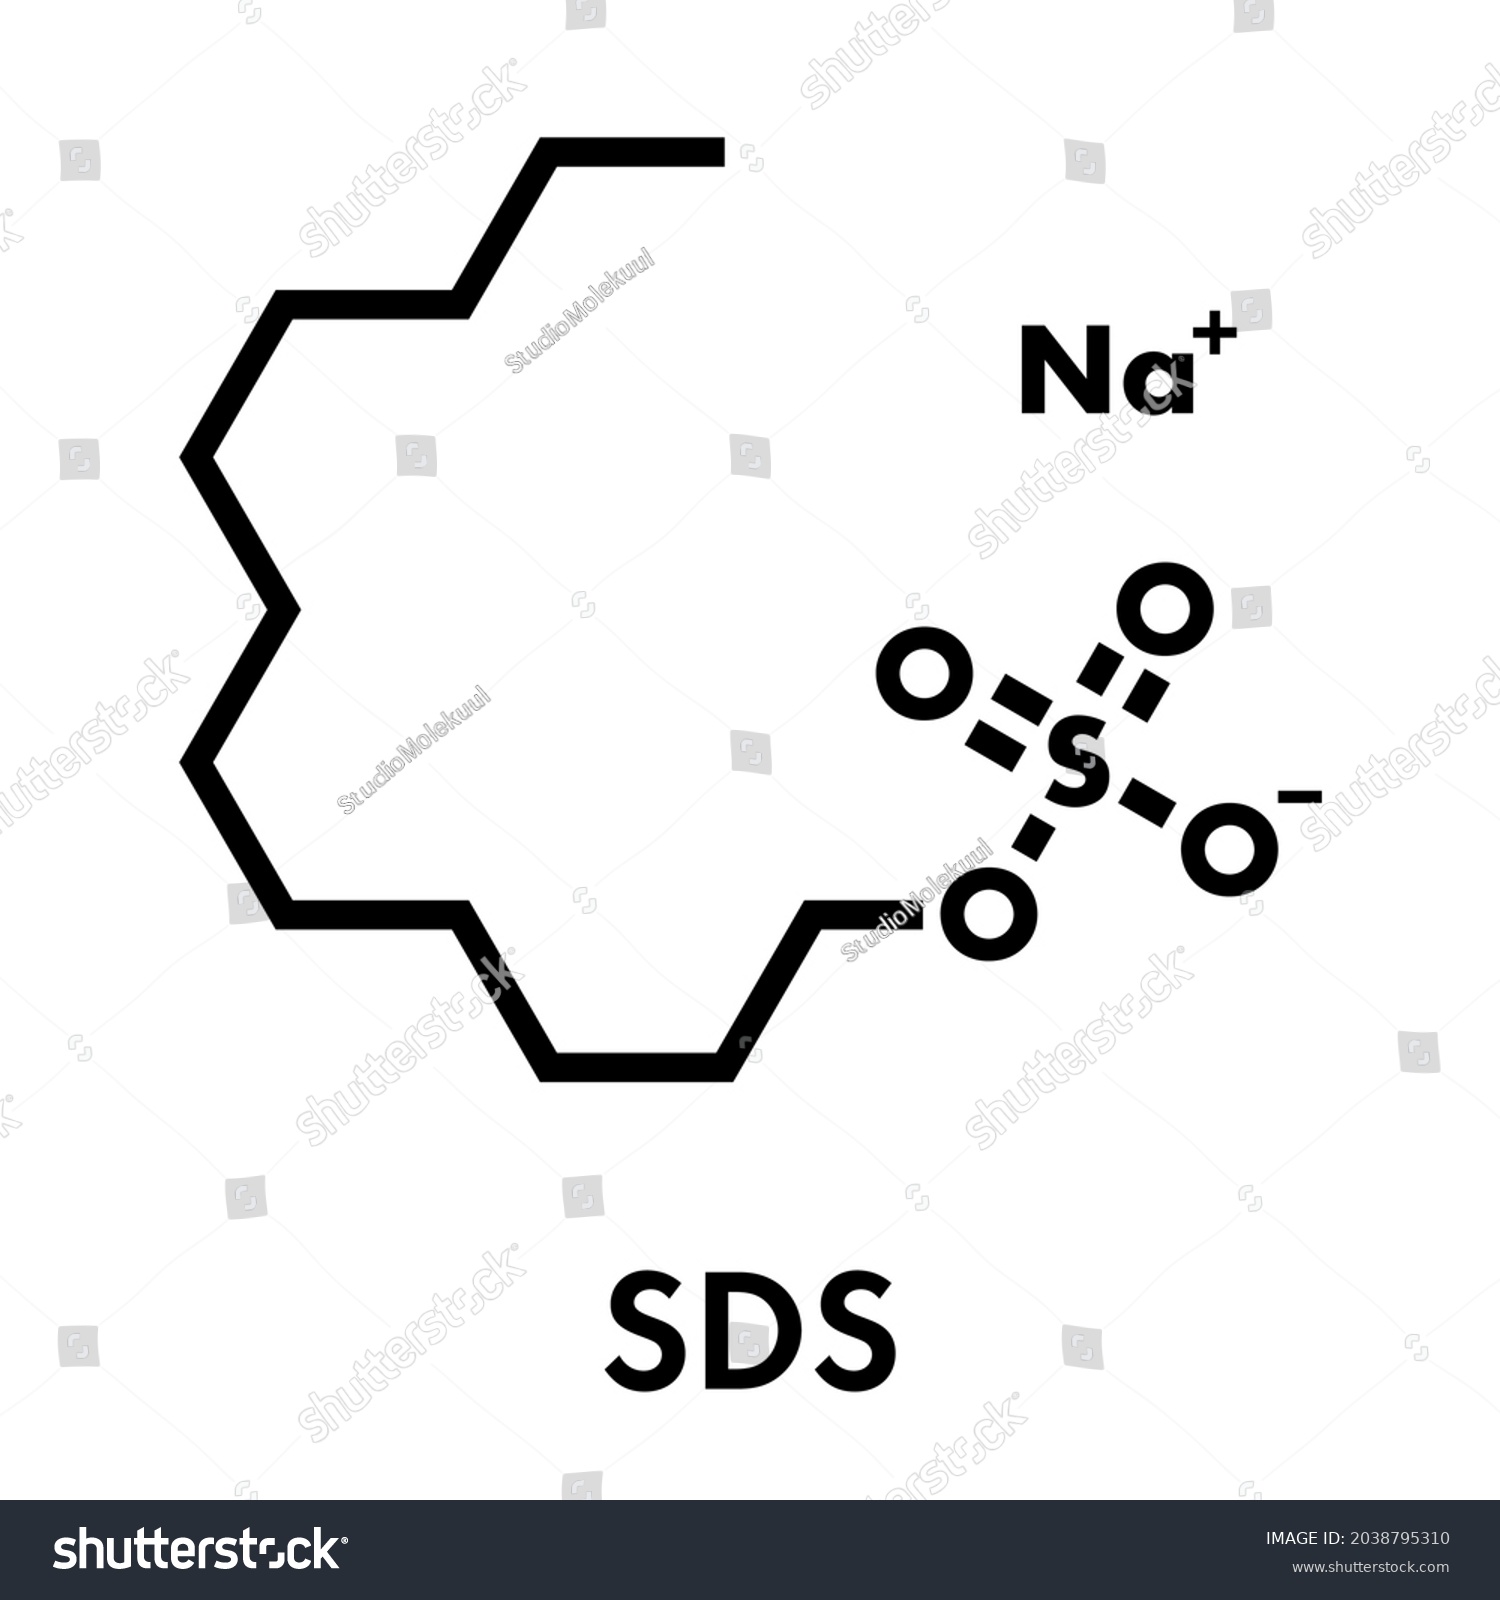 SVG of Sodium dodecyl sulfate (SDS, sodium lauryl sulfate) surfactant molecule. Commonly used in cleaning products. Skeletal formula. svg